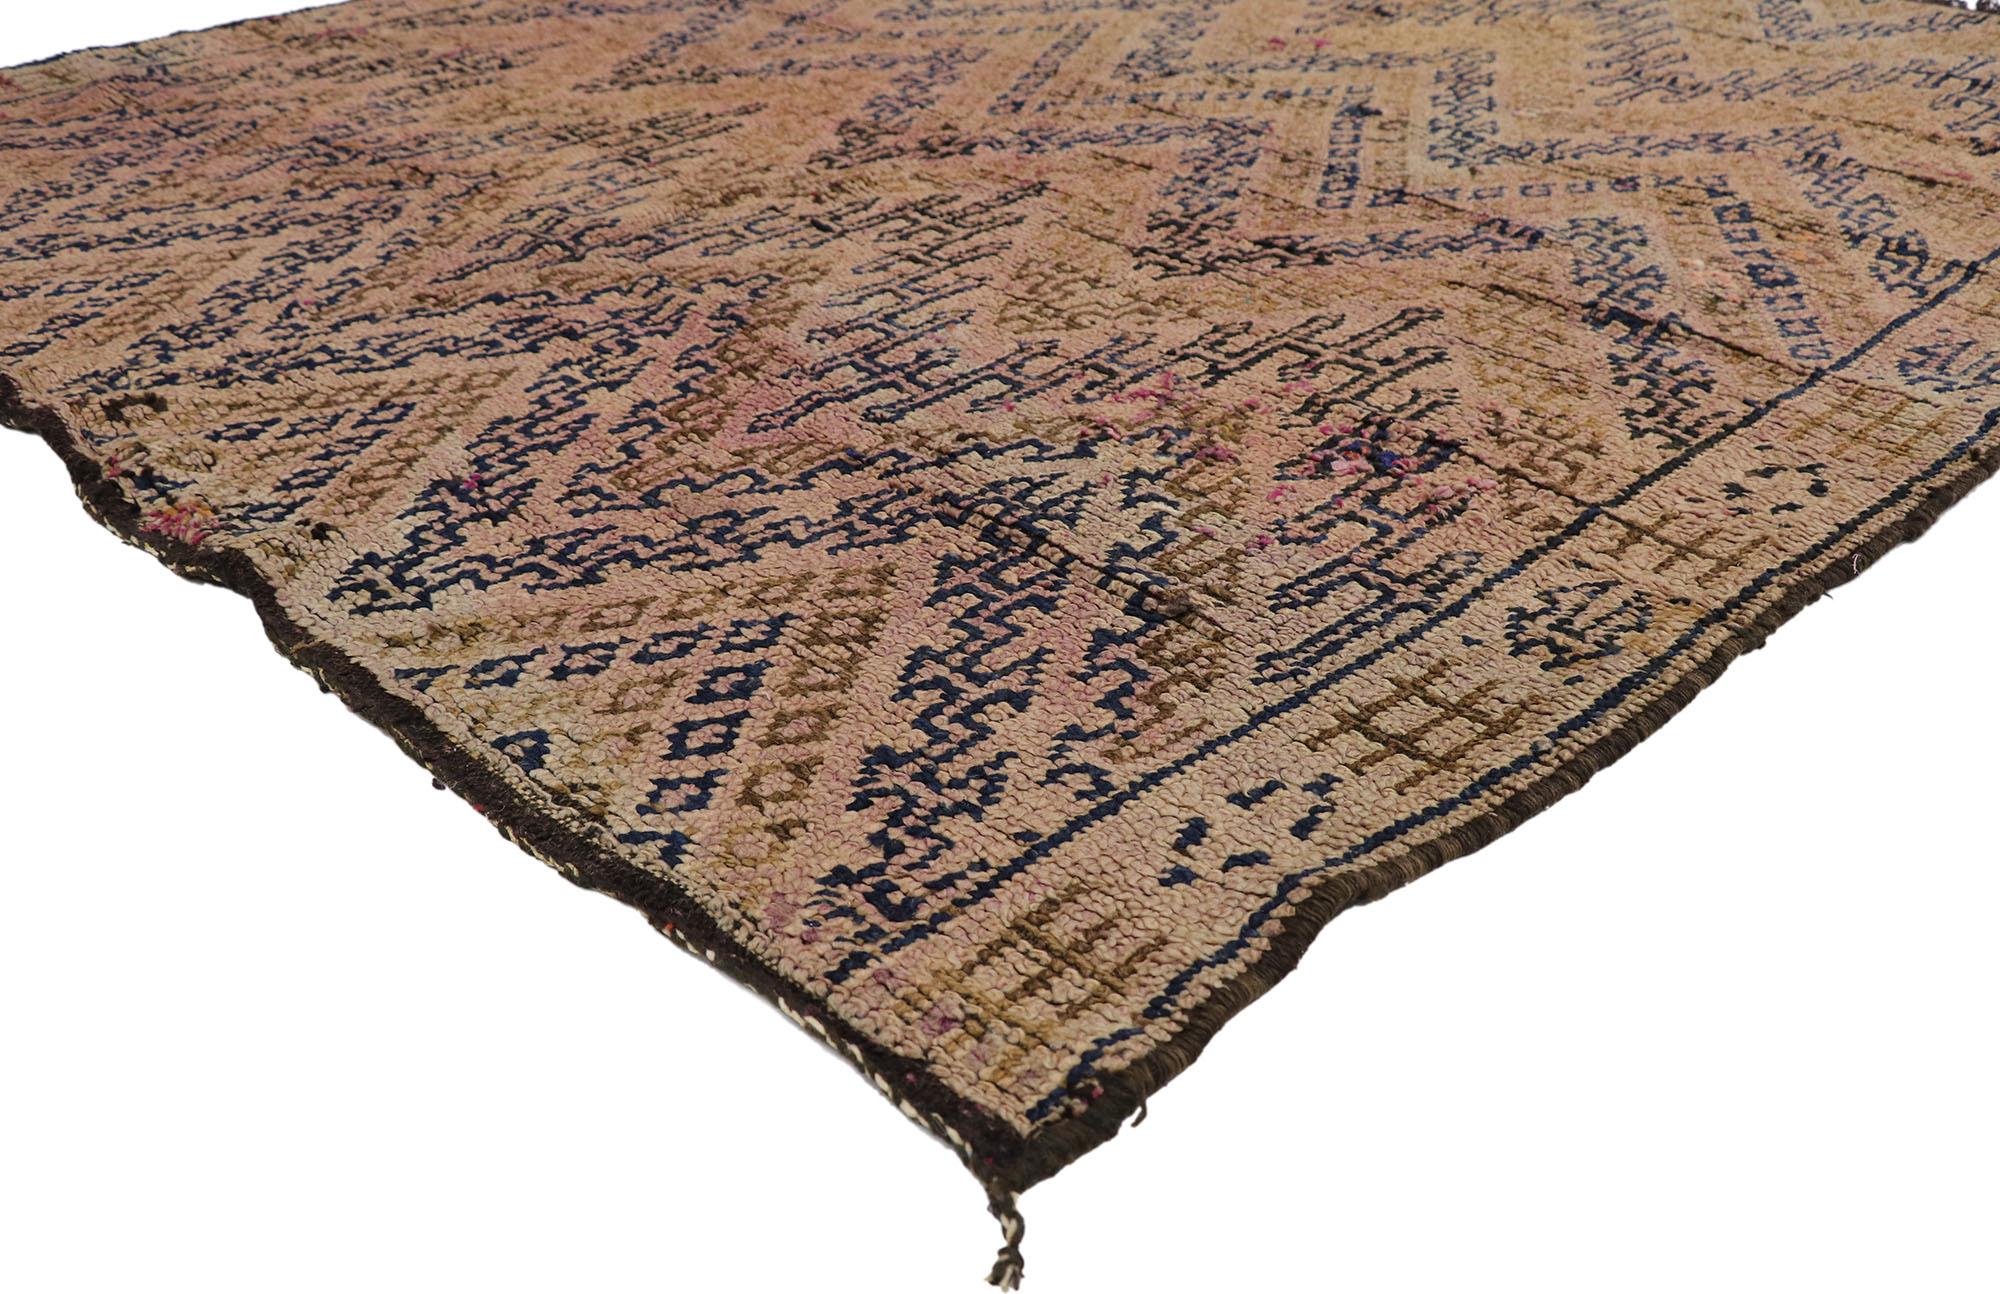 21260, vintage Berber Beni M'Guild Moroccan rug with Bohemian style. Showcasing a bold expressive design, incredible detail and texture, this hand knotted wool vintage Berber Beni M'Guild Moroccan rug is a captivating vision of woven beauty. The